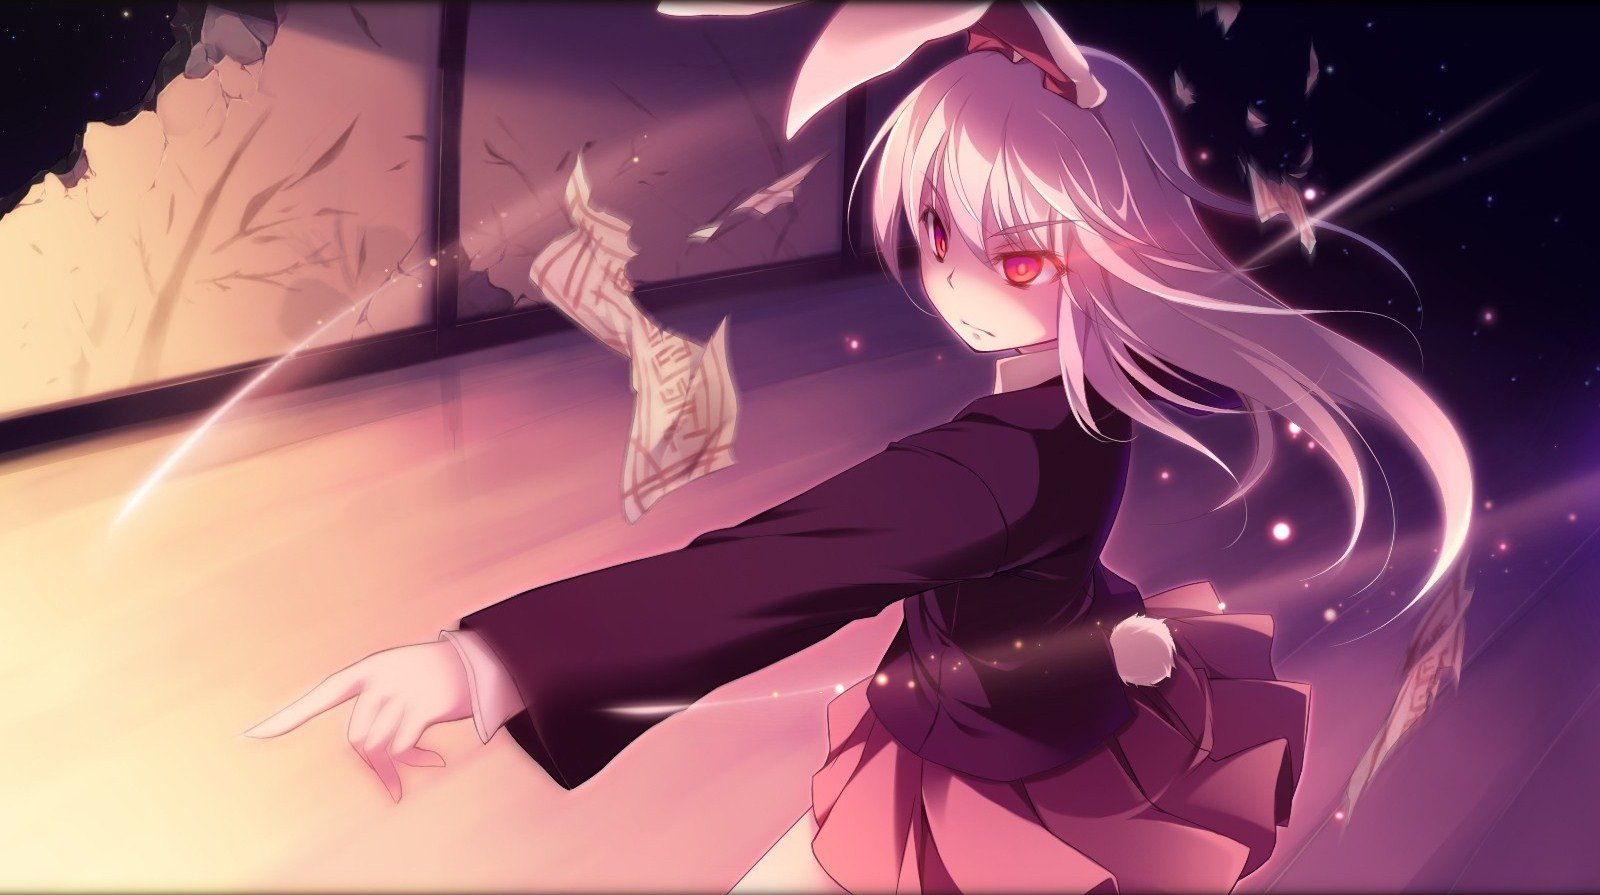 white hair, Long hair, Red eyes, Anime, Anime girls, Bunny ears, Tail,  Skirt HD Wallpapers / Desktop and Mobile Images & Photos